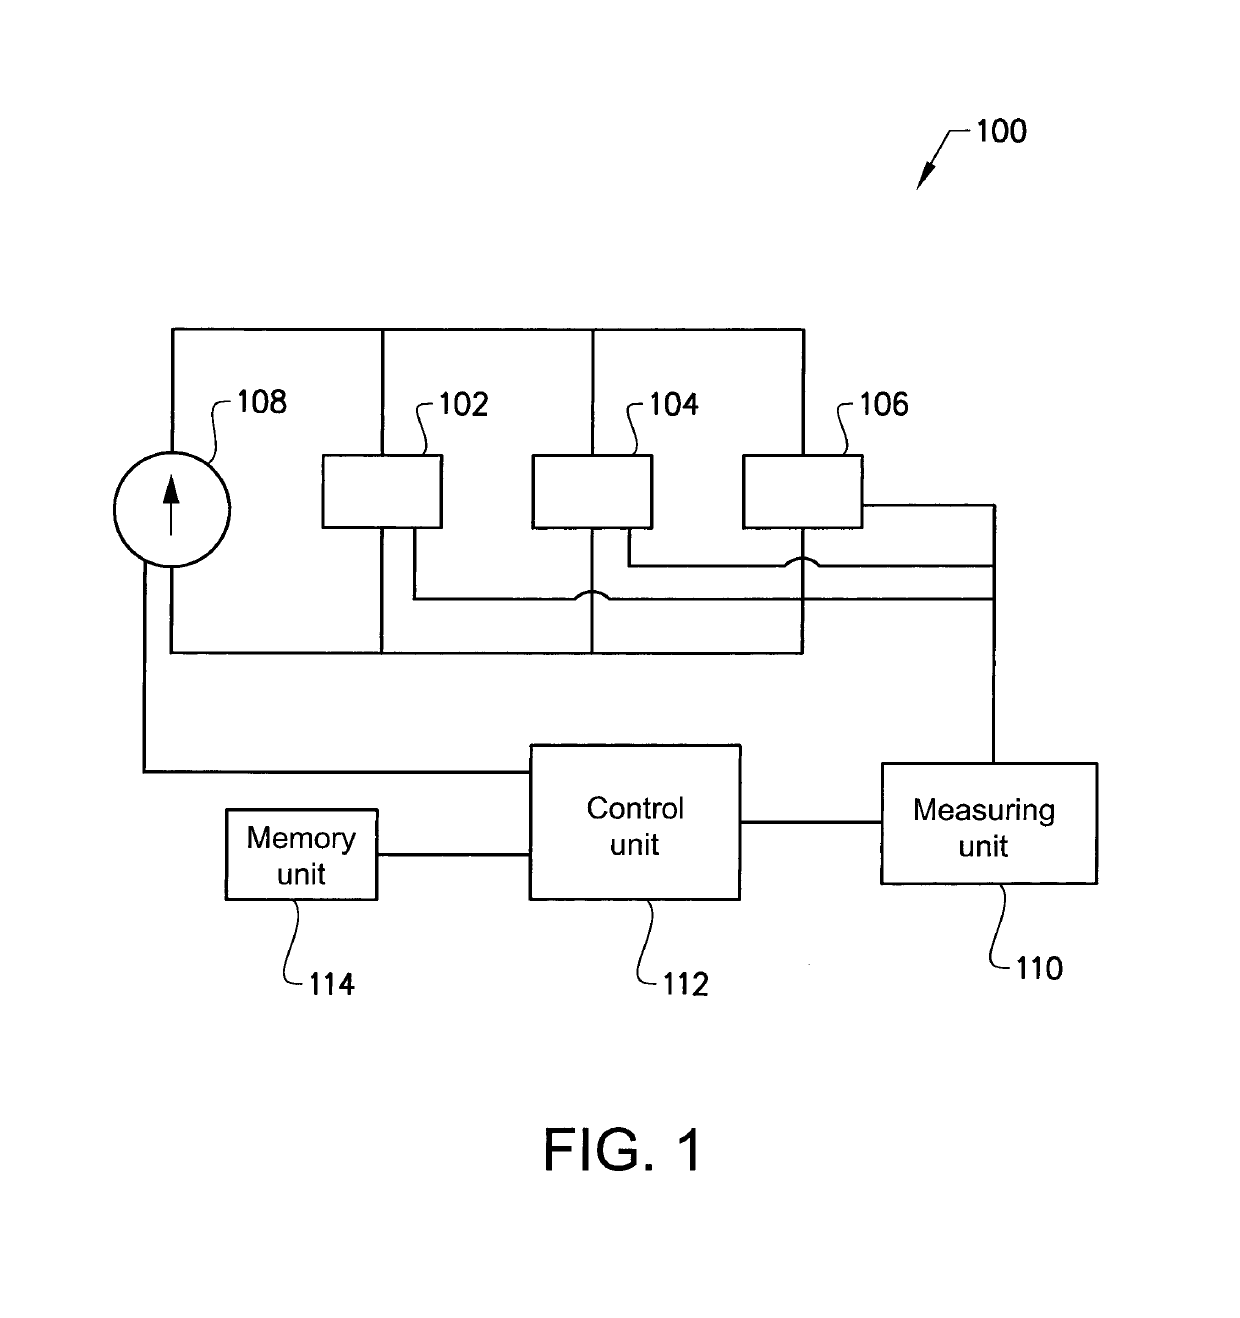 Method for controlling an energy storage system